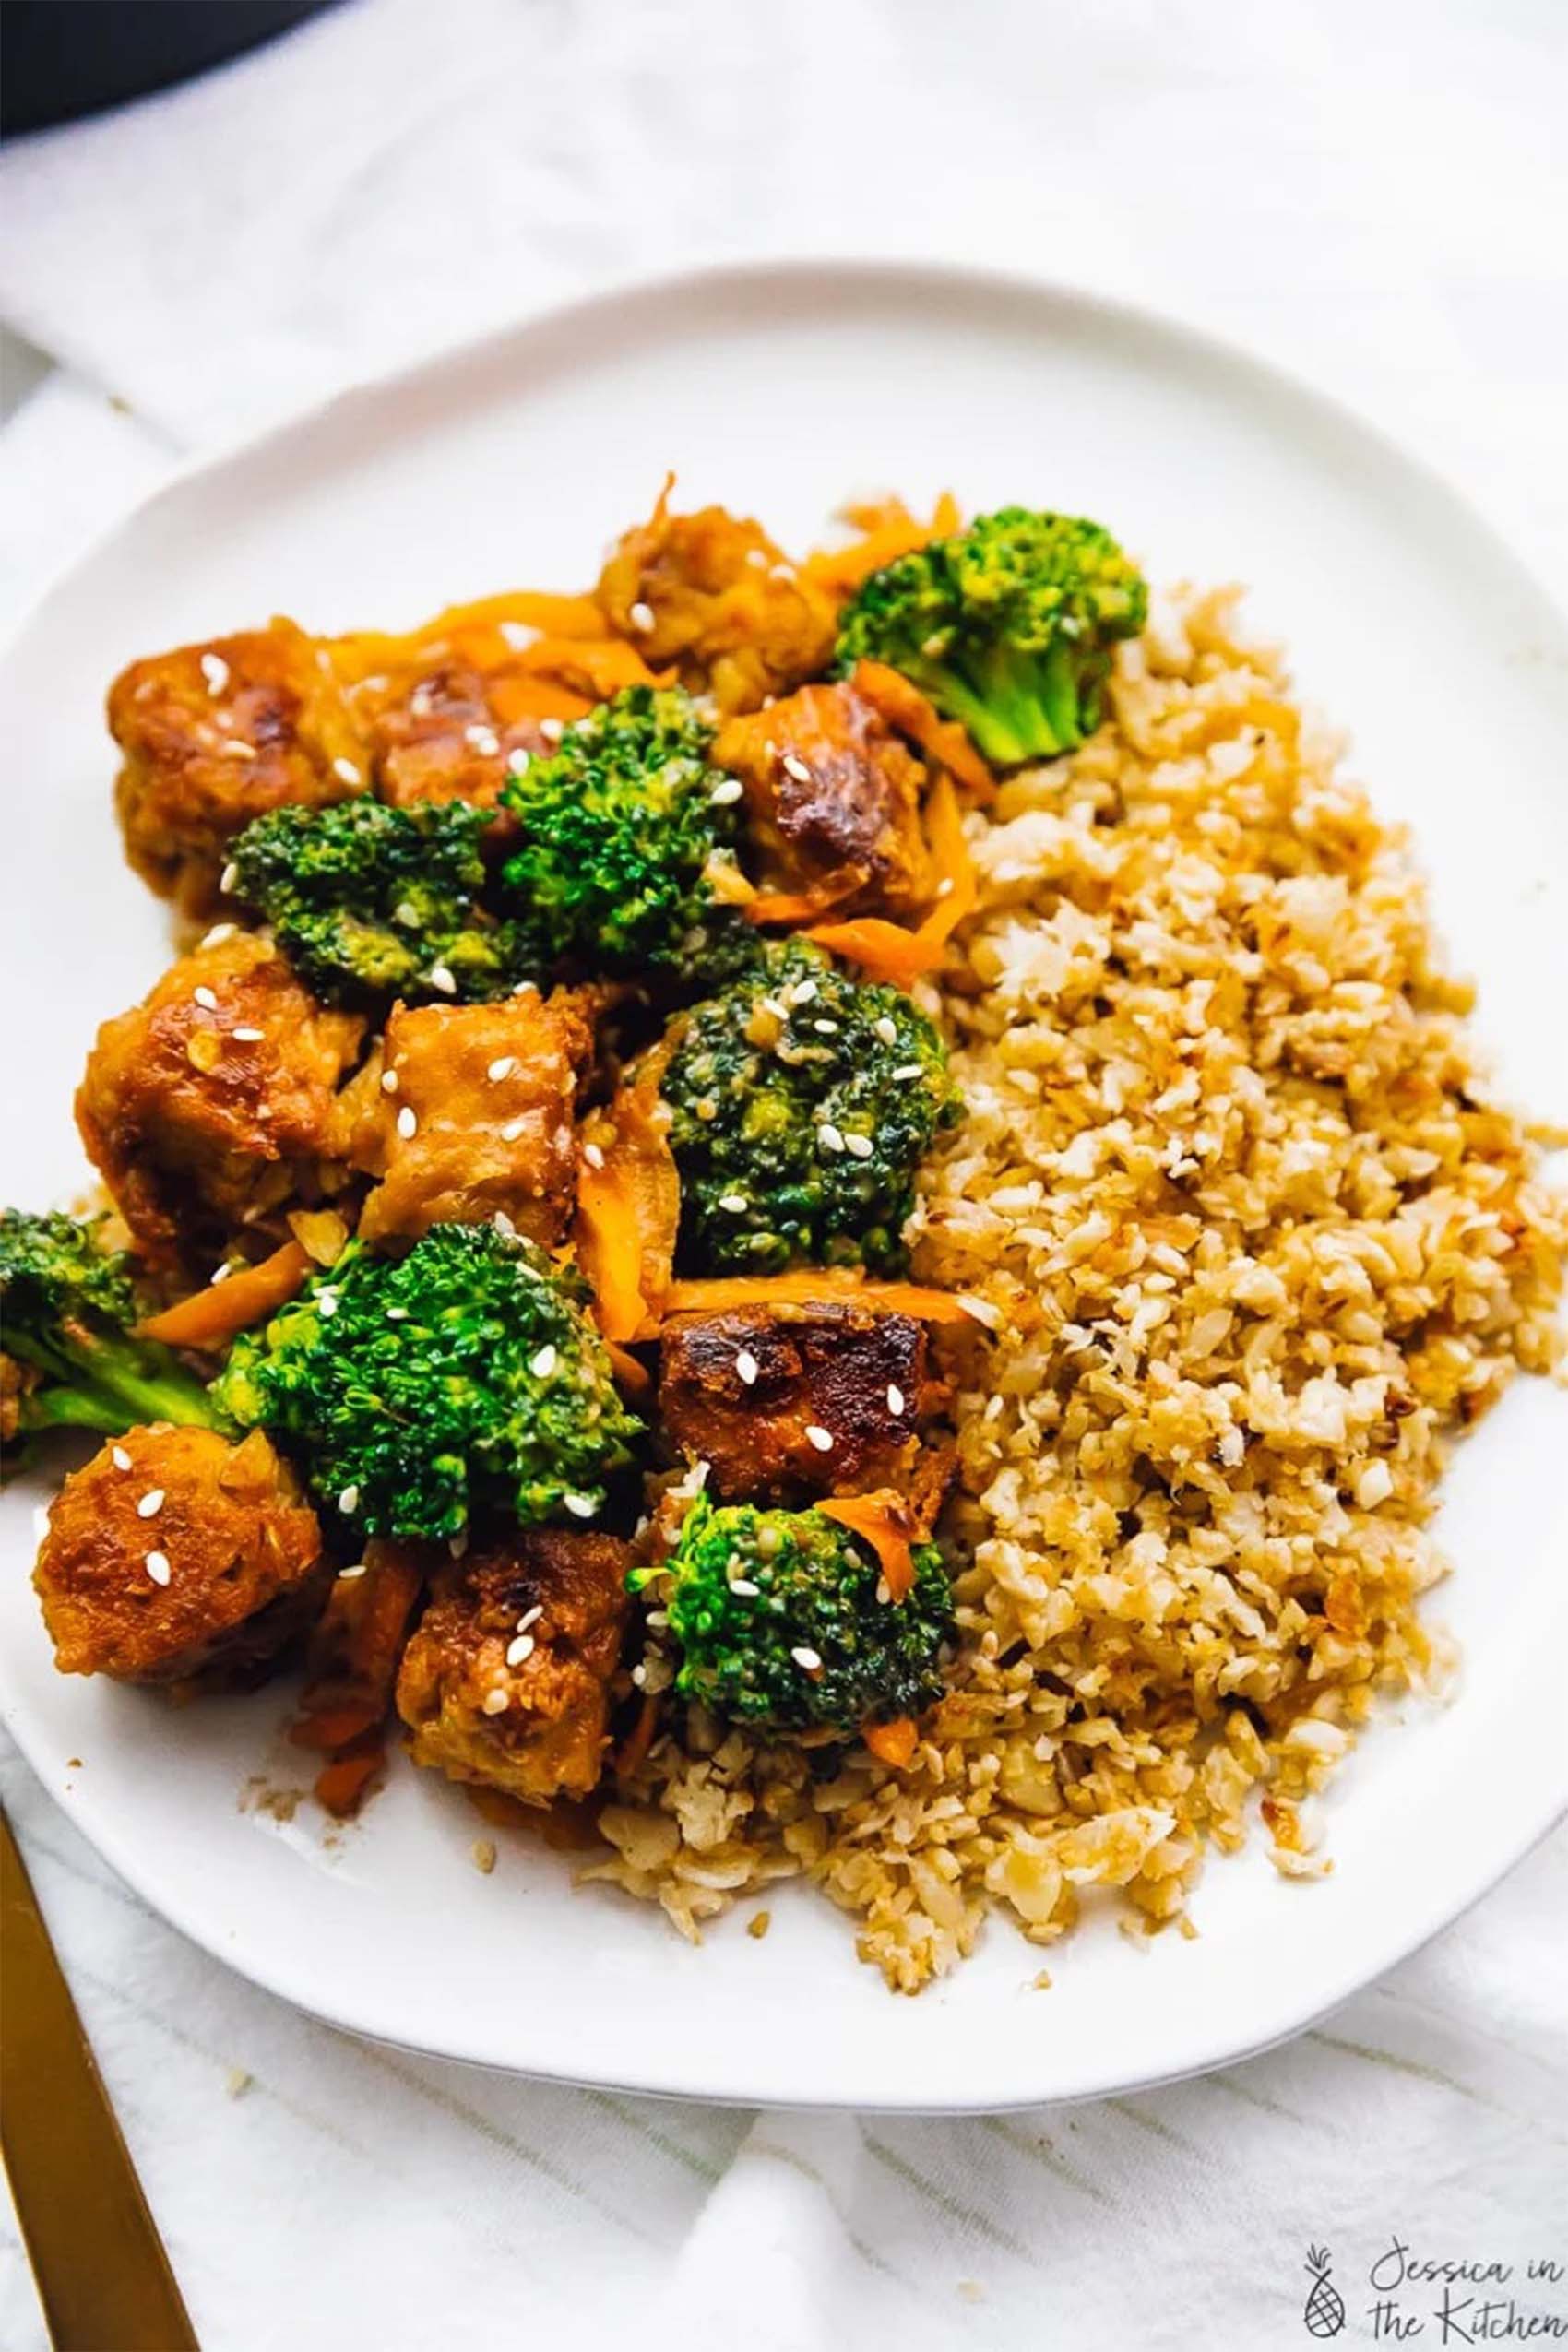 a plate of rice and fried tempeh served with broccoli